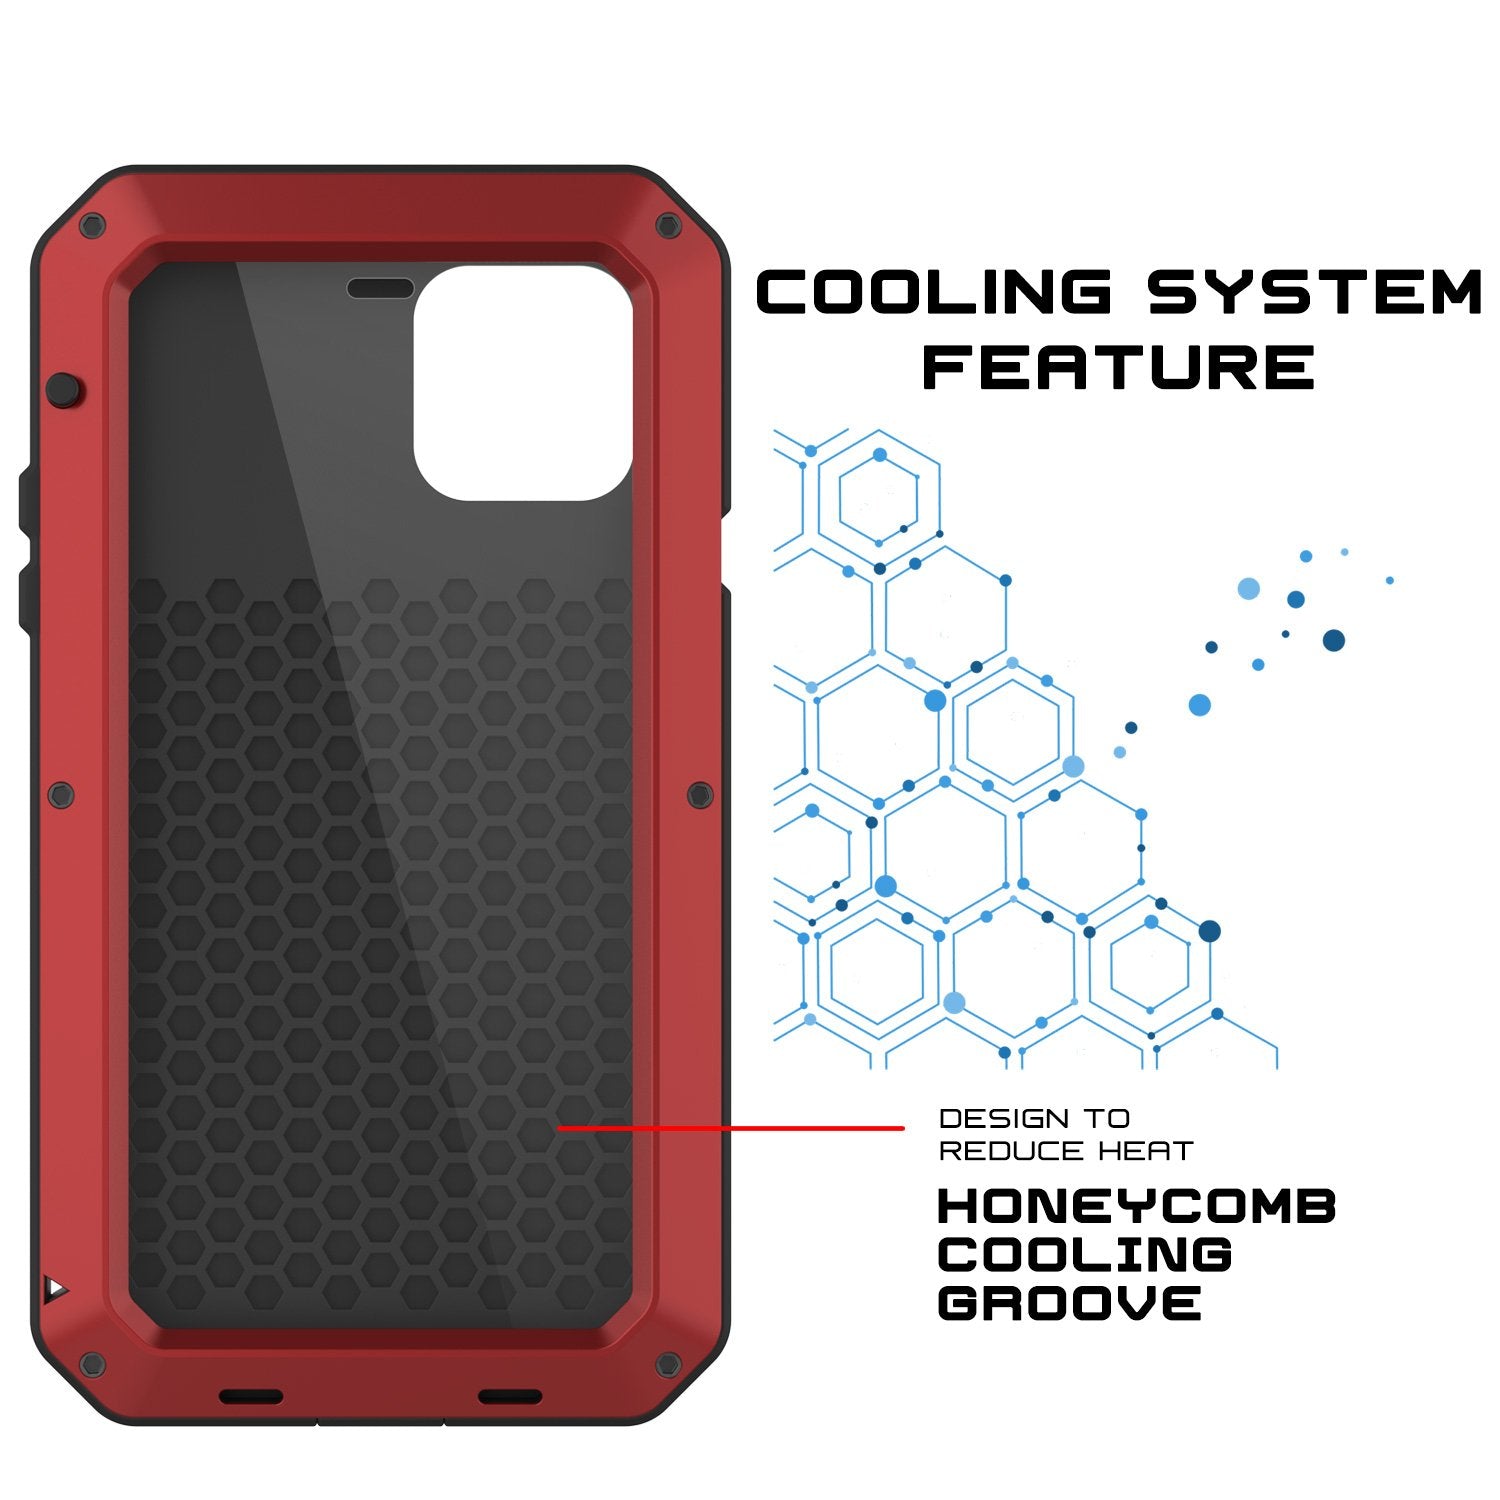 iPhone 11 Pro Max Metal Case, Heavy Duty Military Grade Armor Cover [shock proof] Full Body Hard [Red]